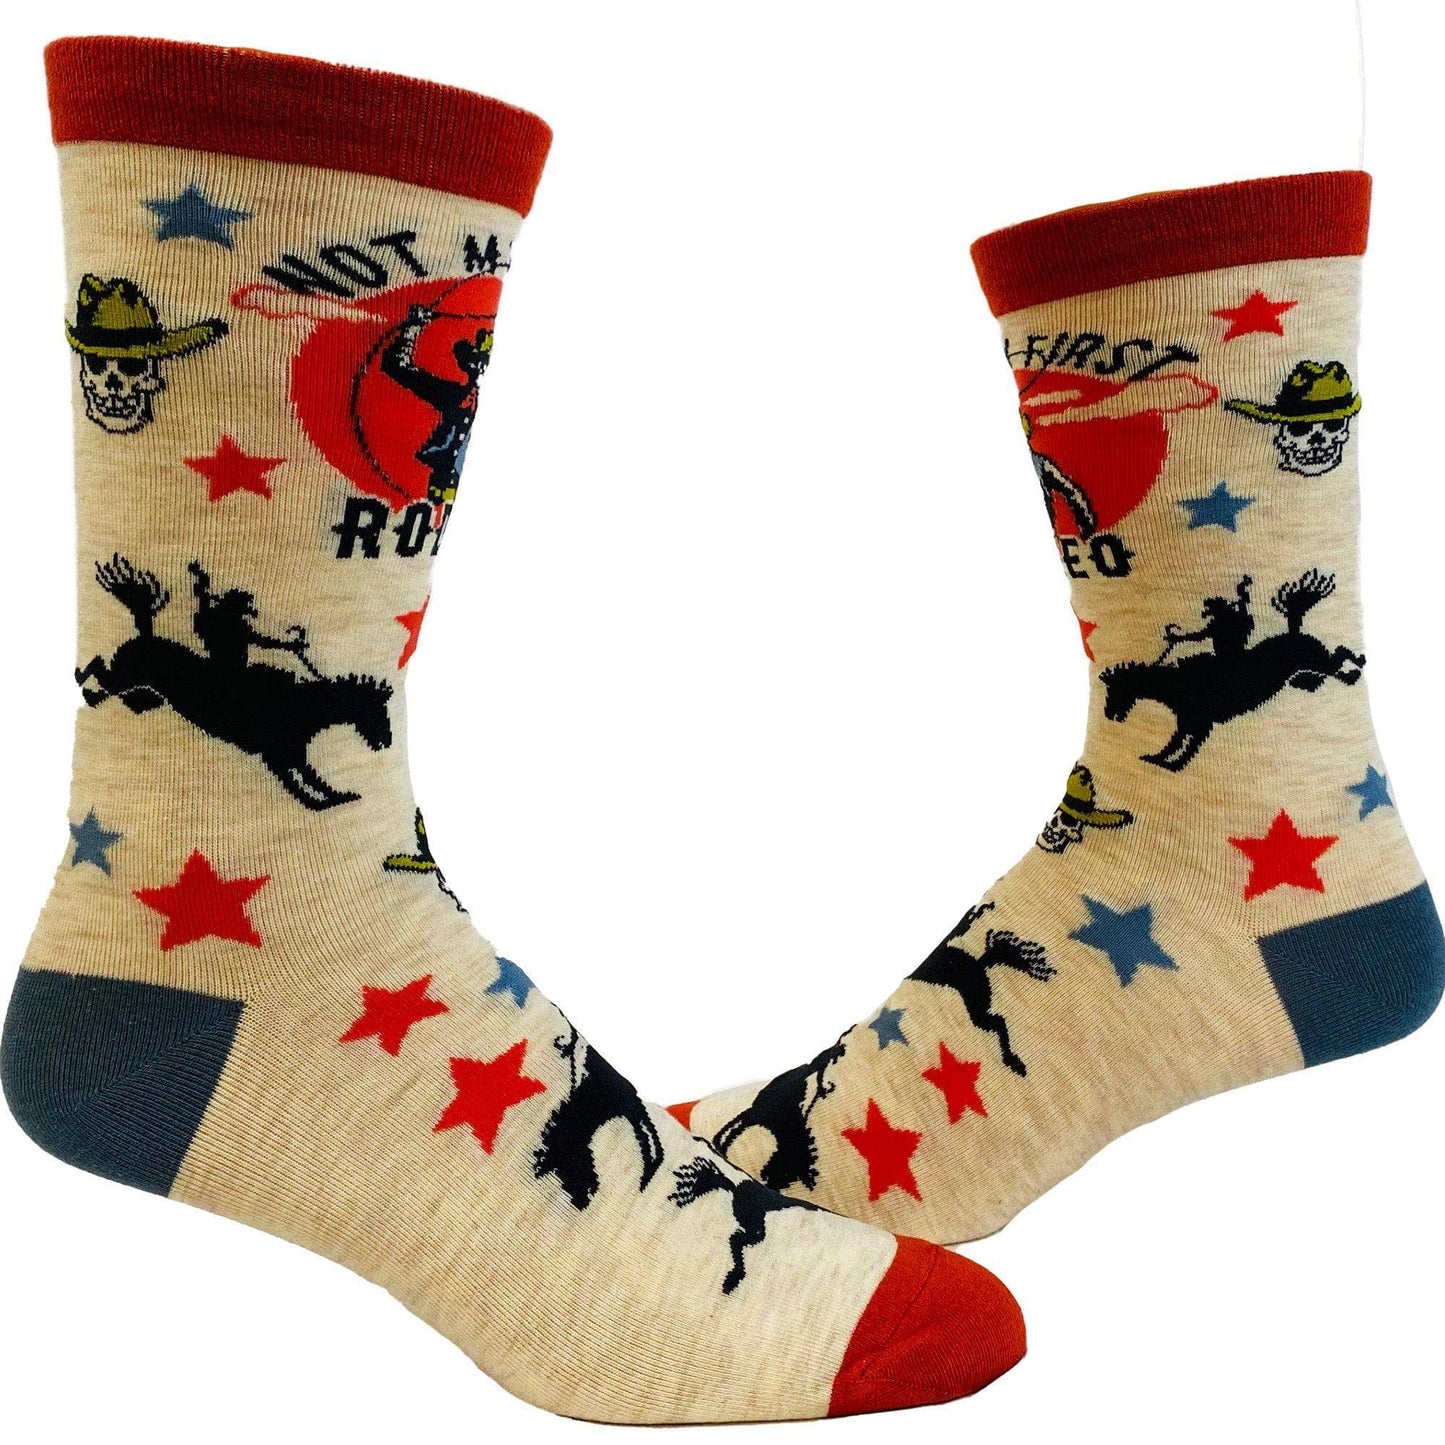 Men's Not My First Rodeo Socks